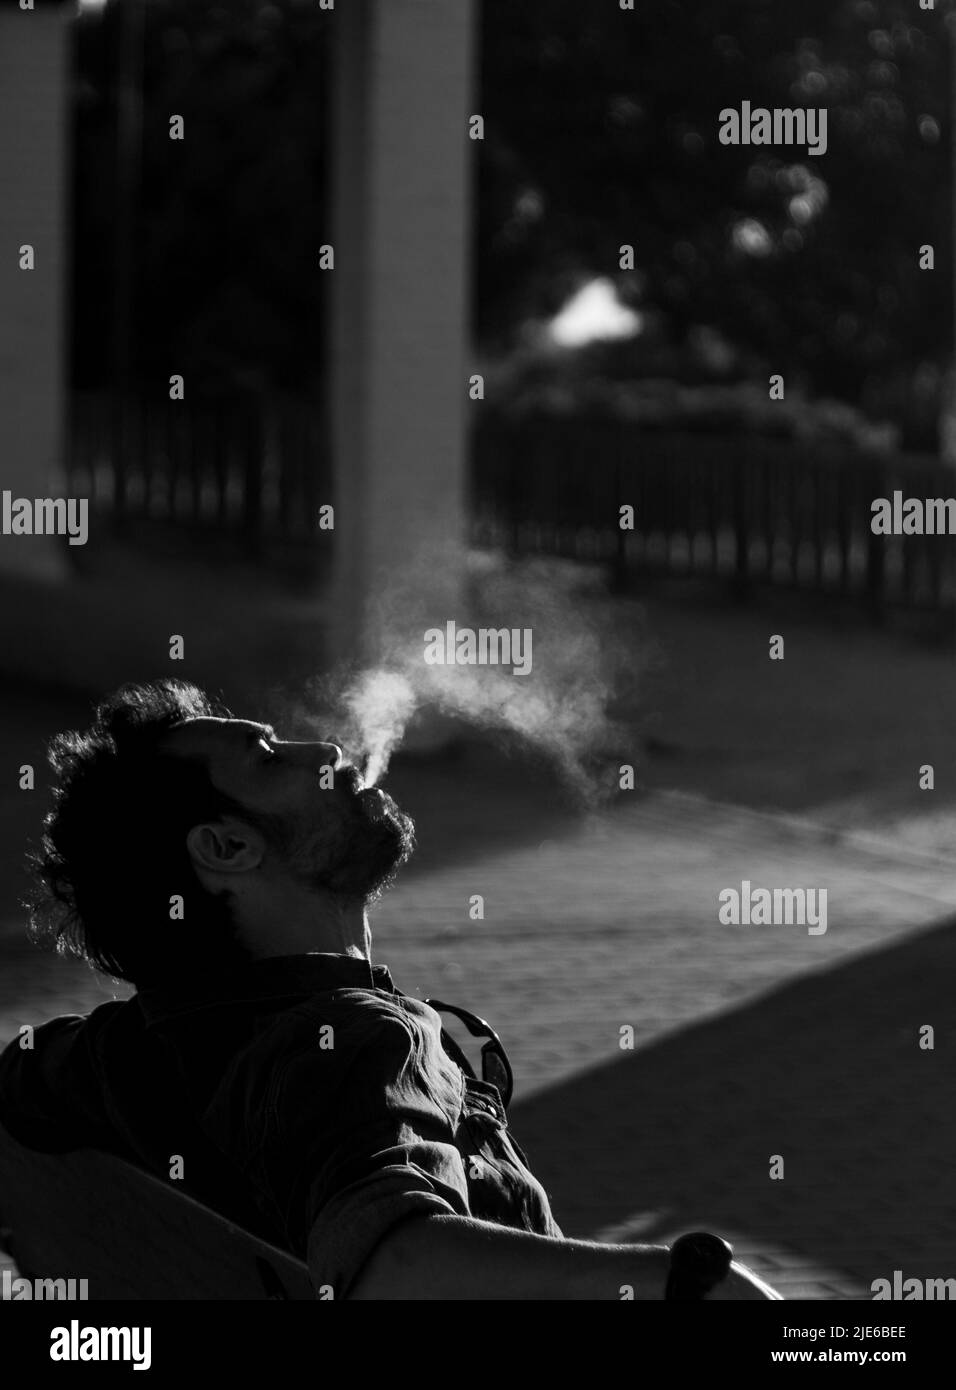 thoughtful man smoking a cigarette alone in black and white selective focus Stock Photo